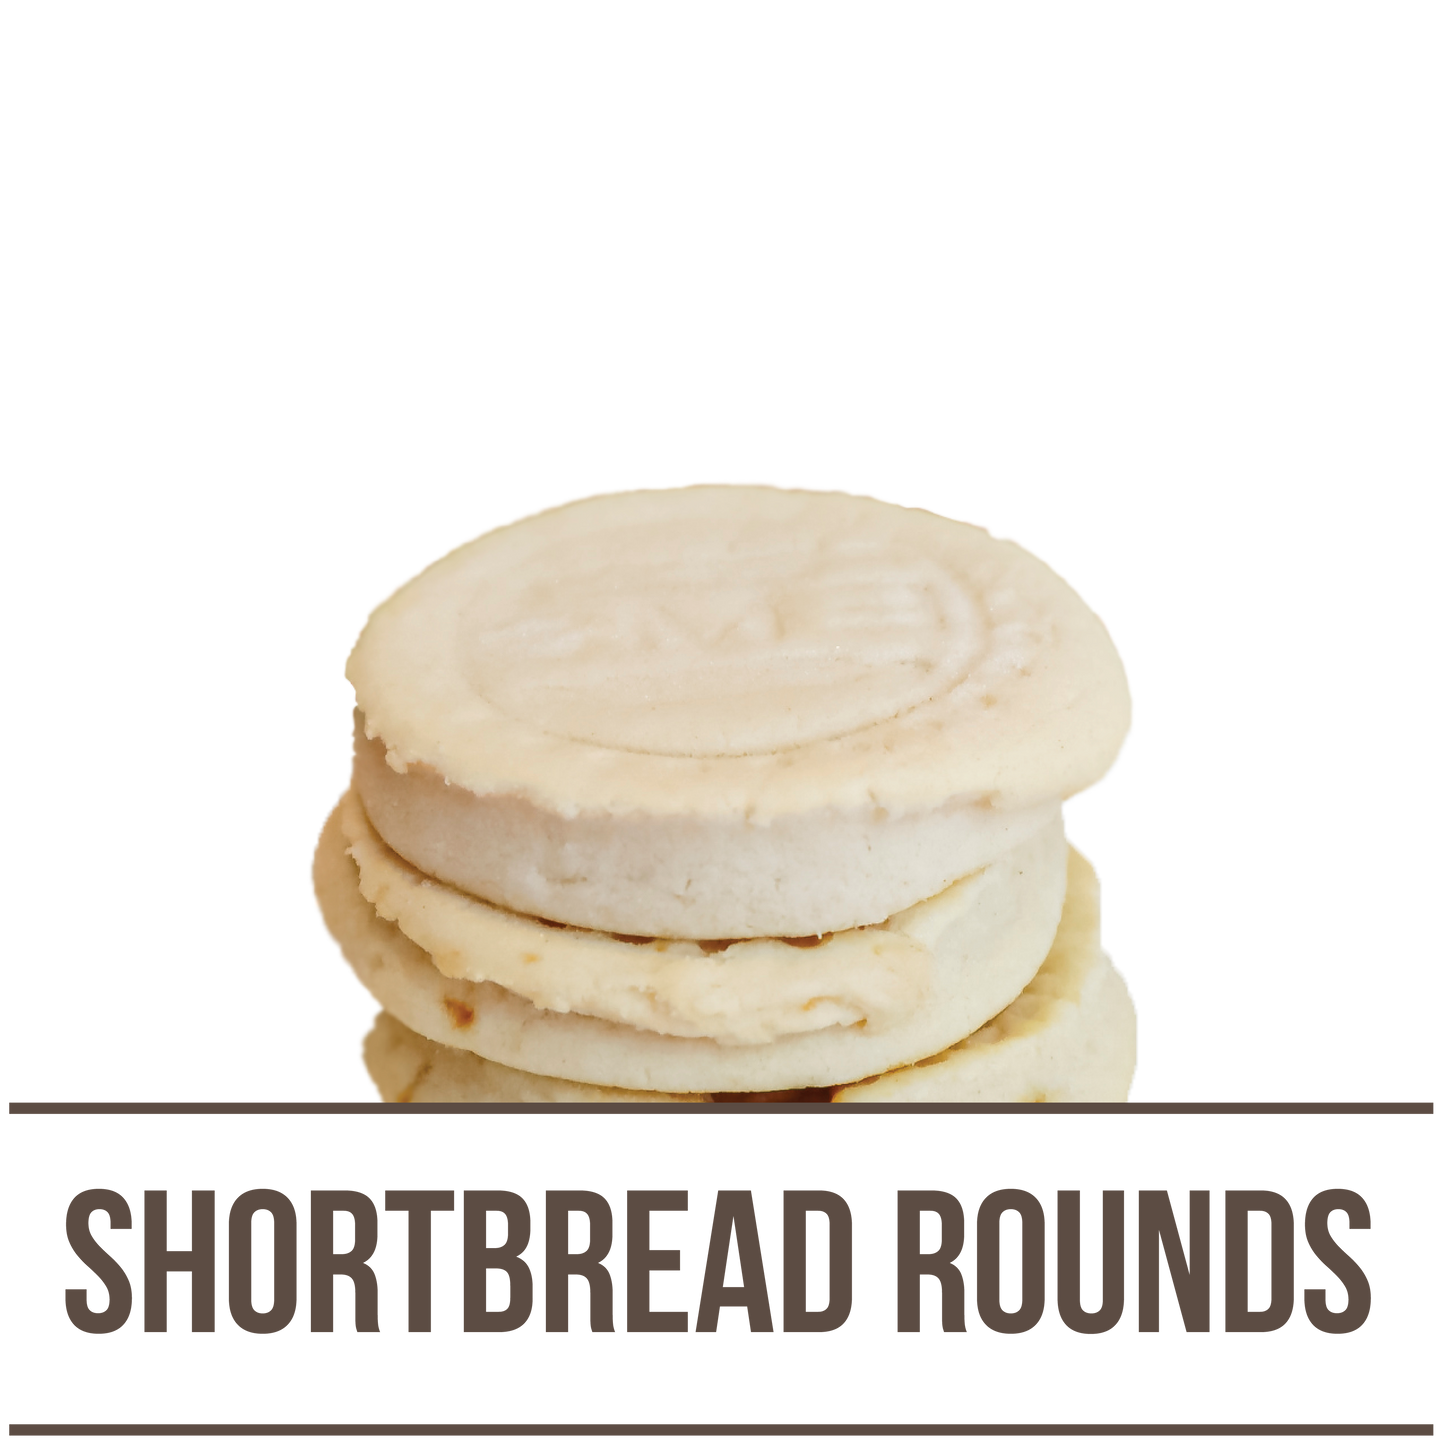 SHORTBREAD COOKIES DOUBLES Original, Toffee, Chocolate Chip *SEASONAL* Double Chocolate, White Chocolate Cranberry